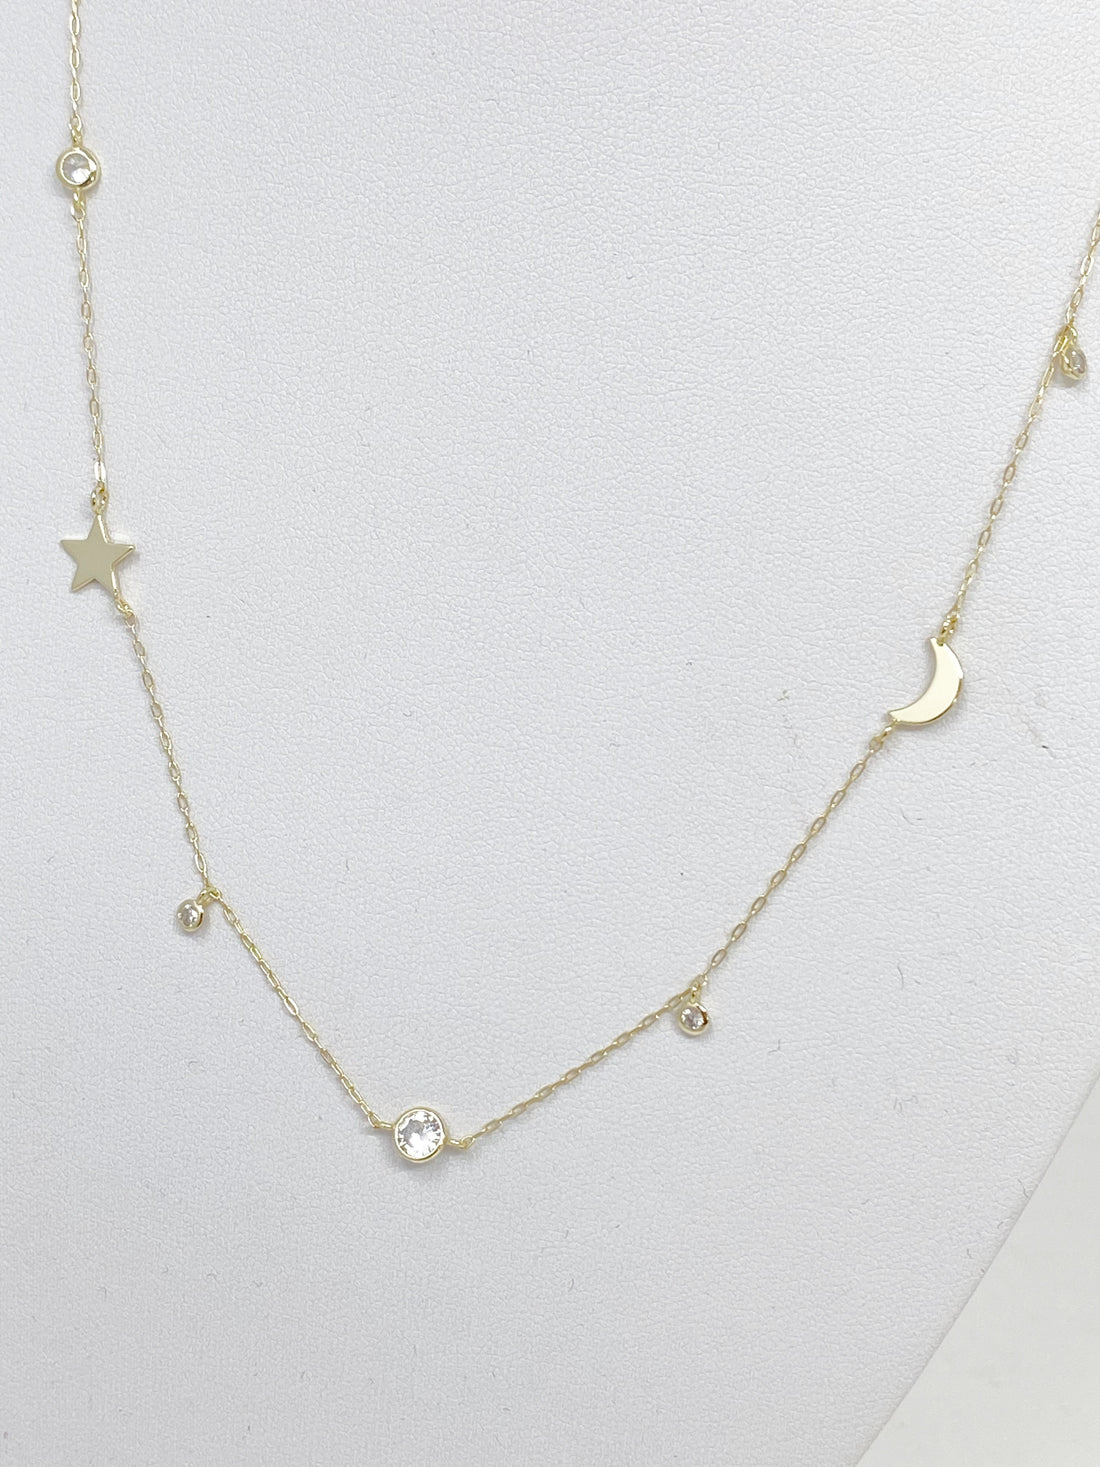 Moons, Stars, and Bling Necklace in Gold